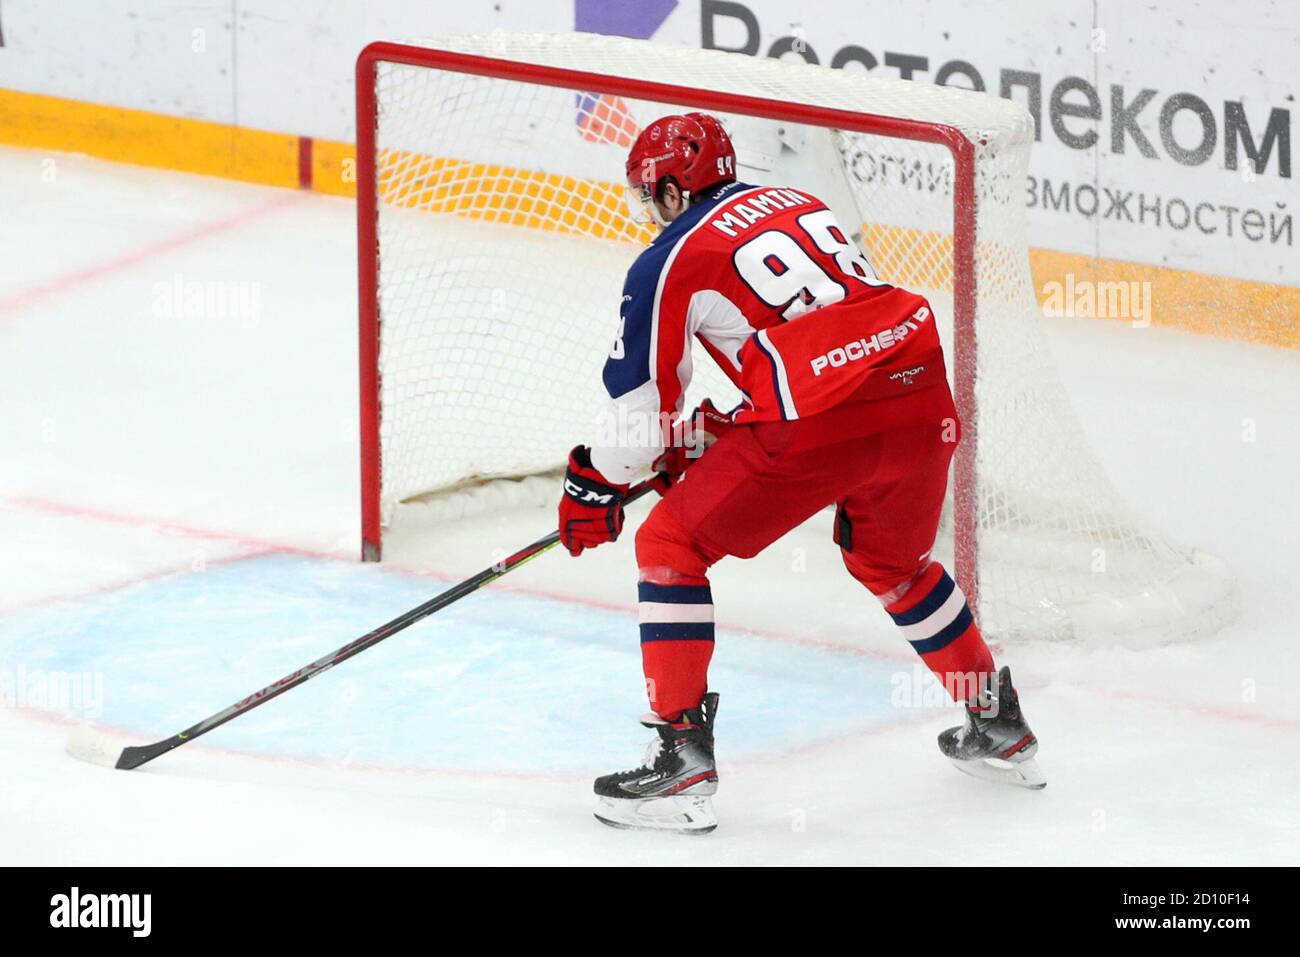 Buy Khl Live Scores UP TO 59% OFF